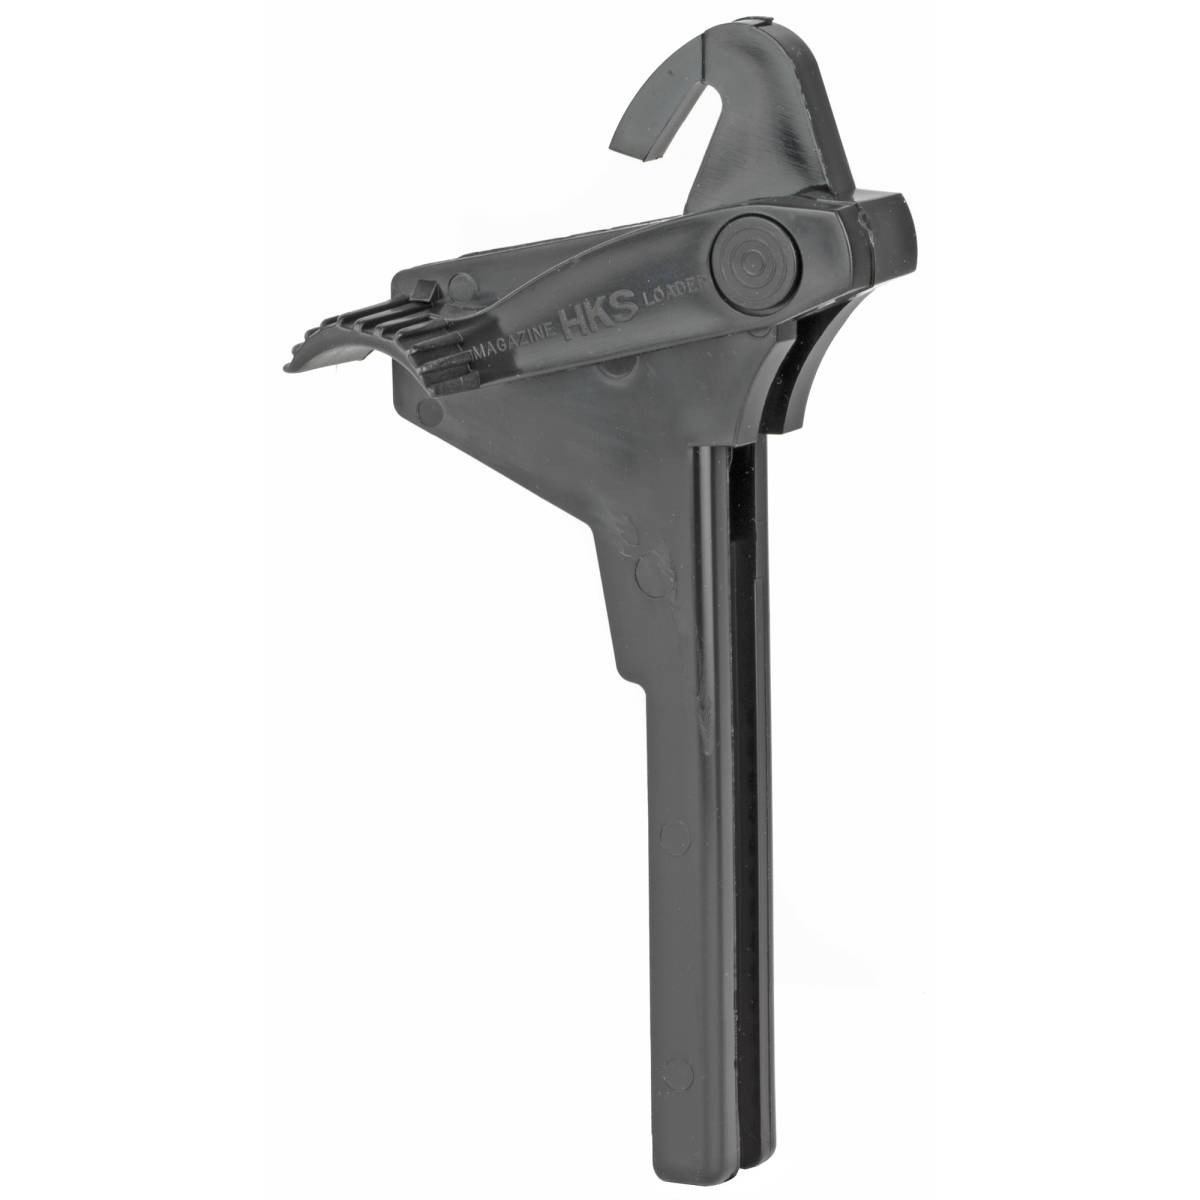 HKS 943 Single Stack Mag Loader Adjustable Style made of Plastic with...-img-1